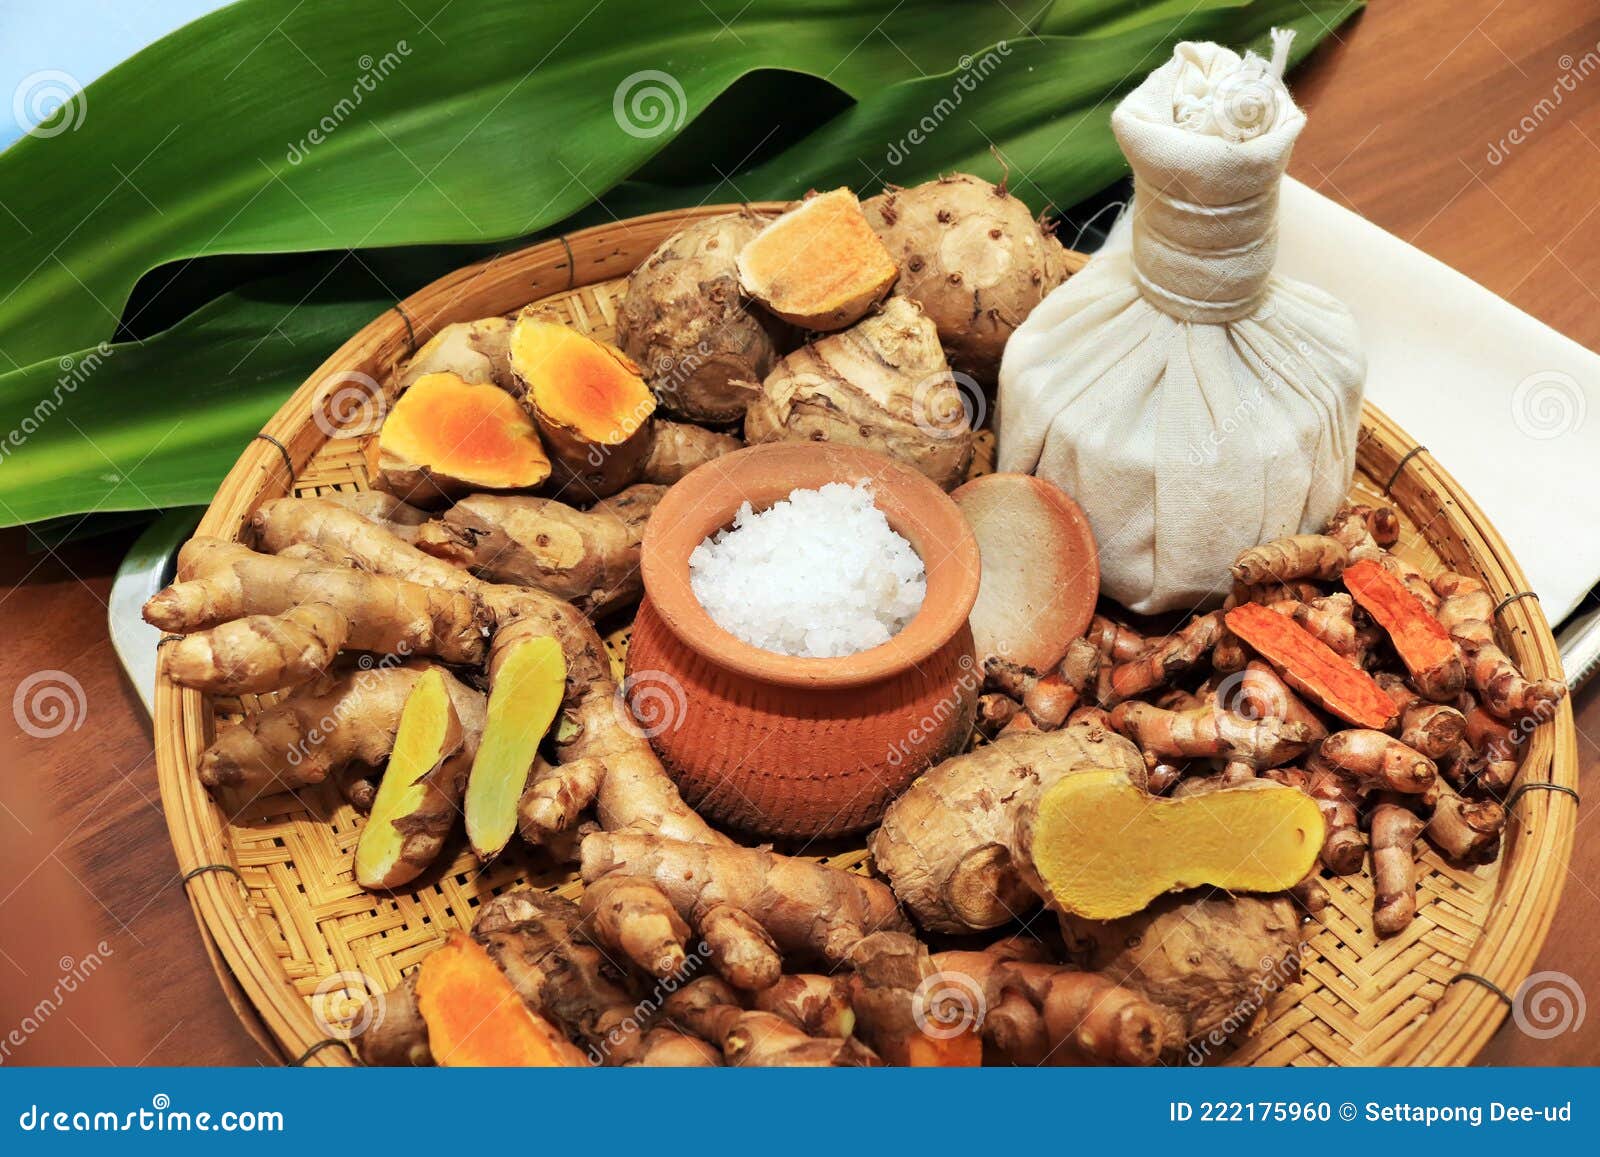 herbs ingredients for override the salt pot or steam bath and sourna